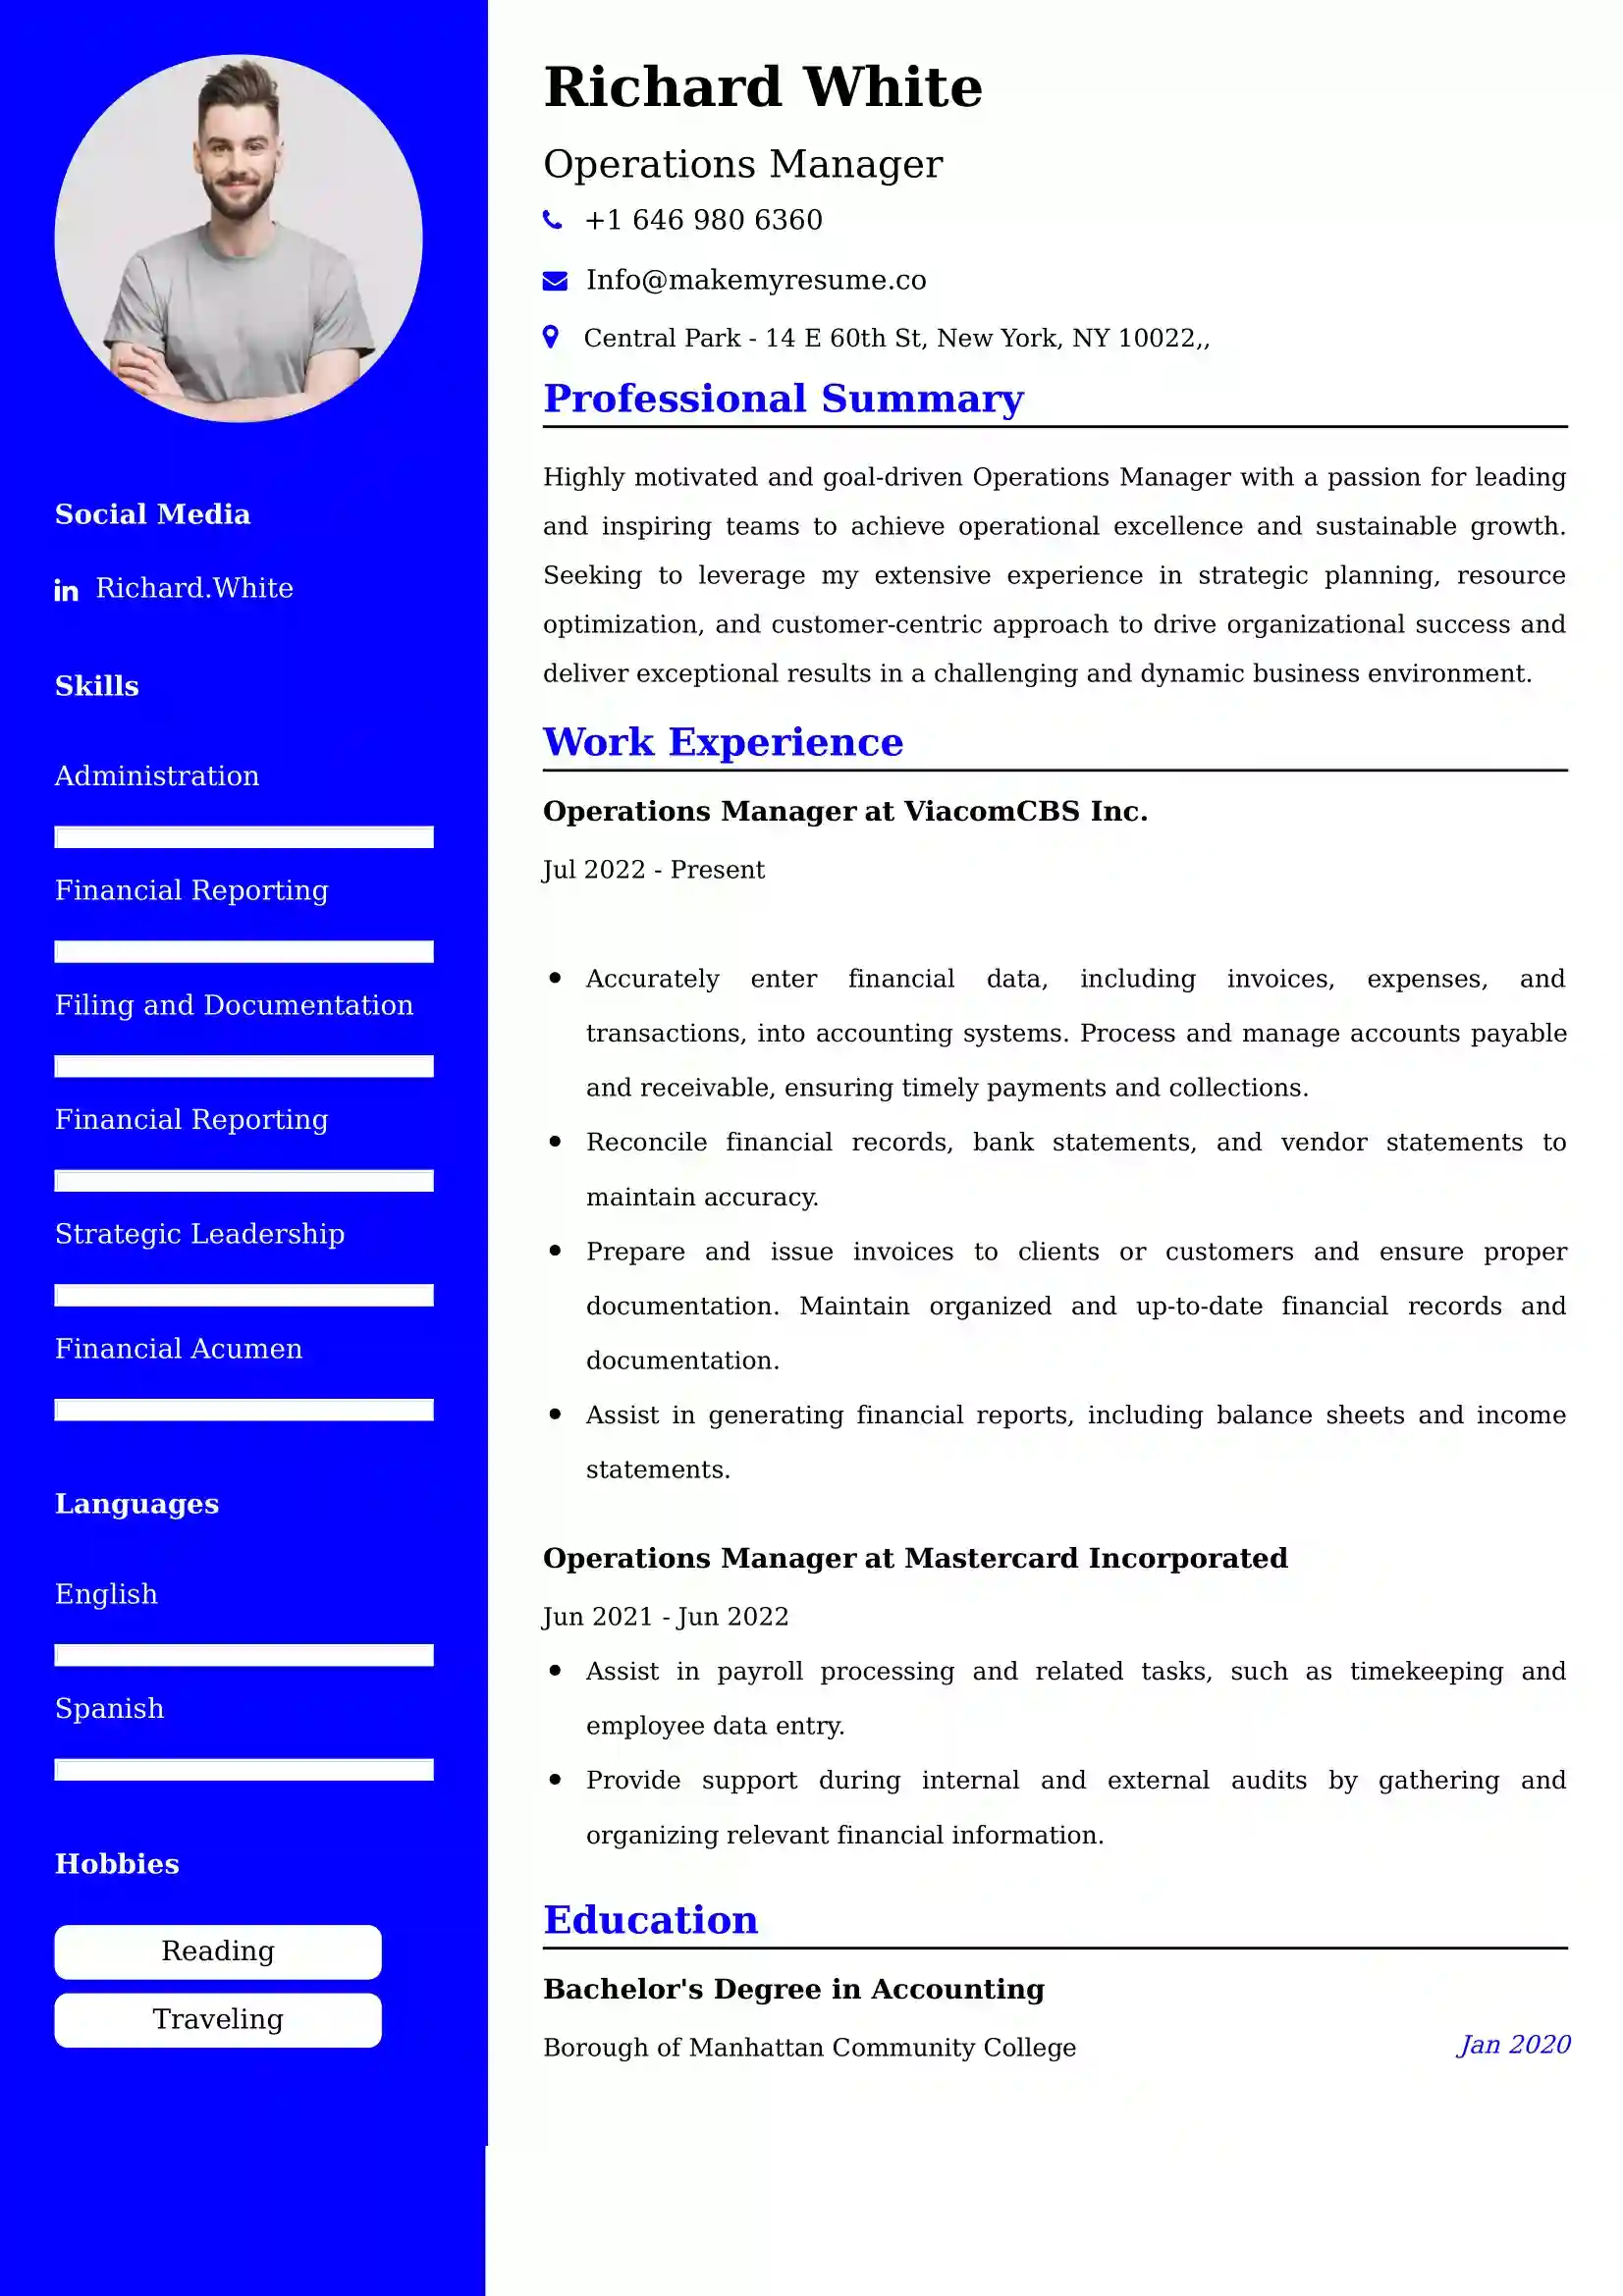 Operations Manager Resume Examples - Australian Format and Tips